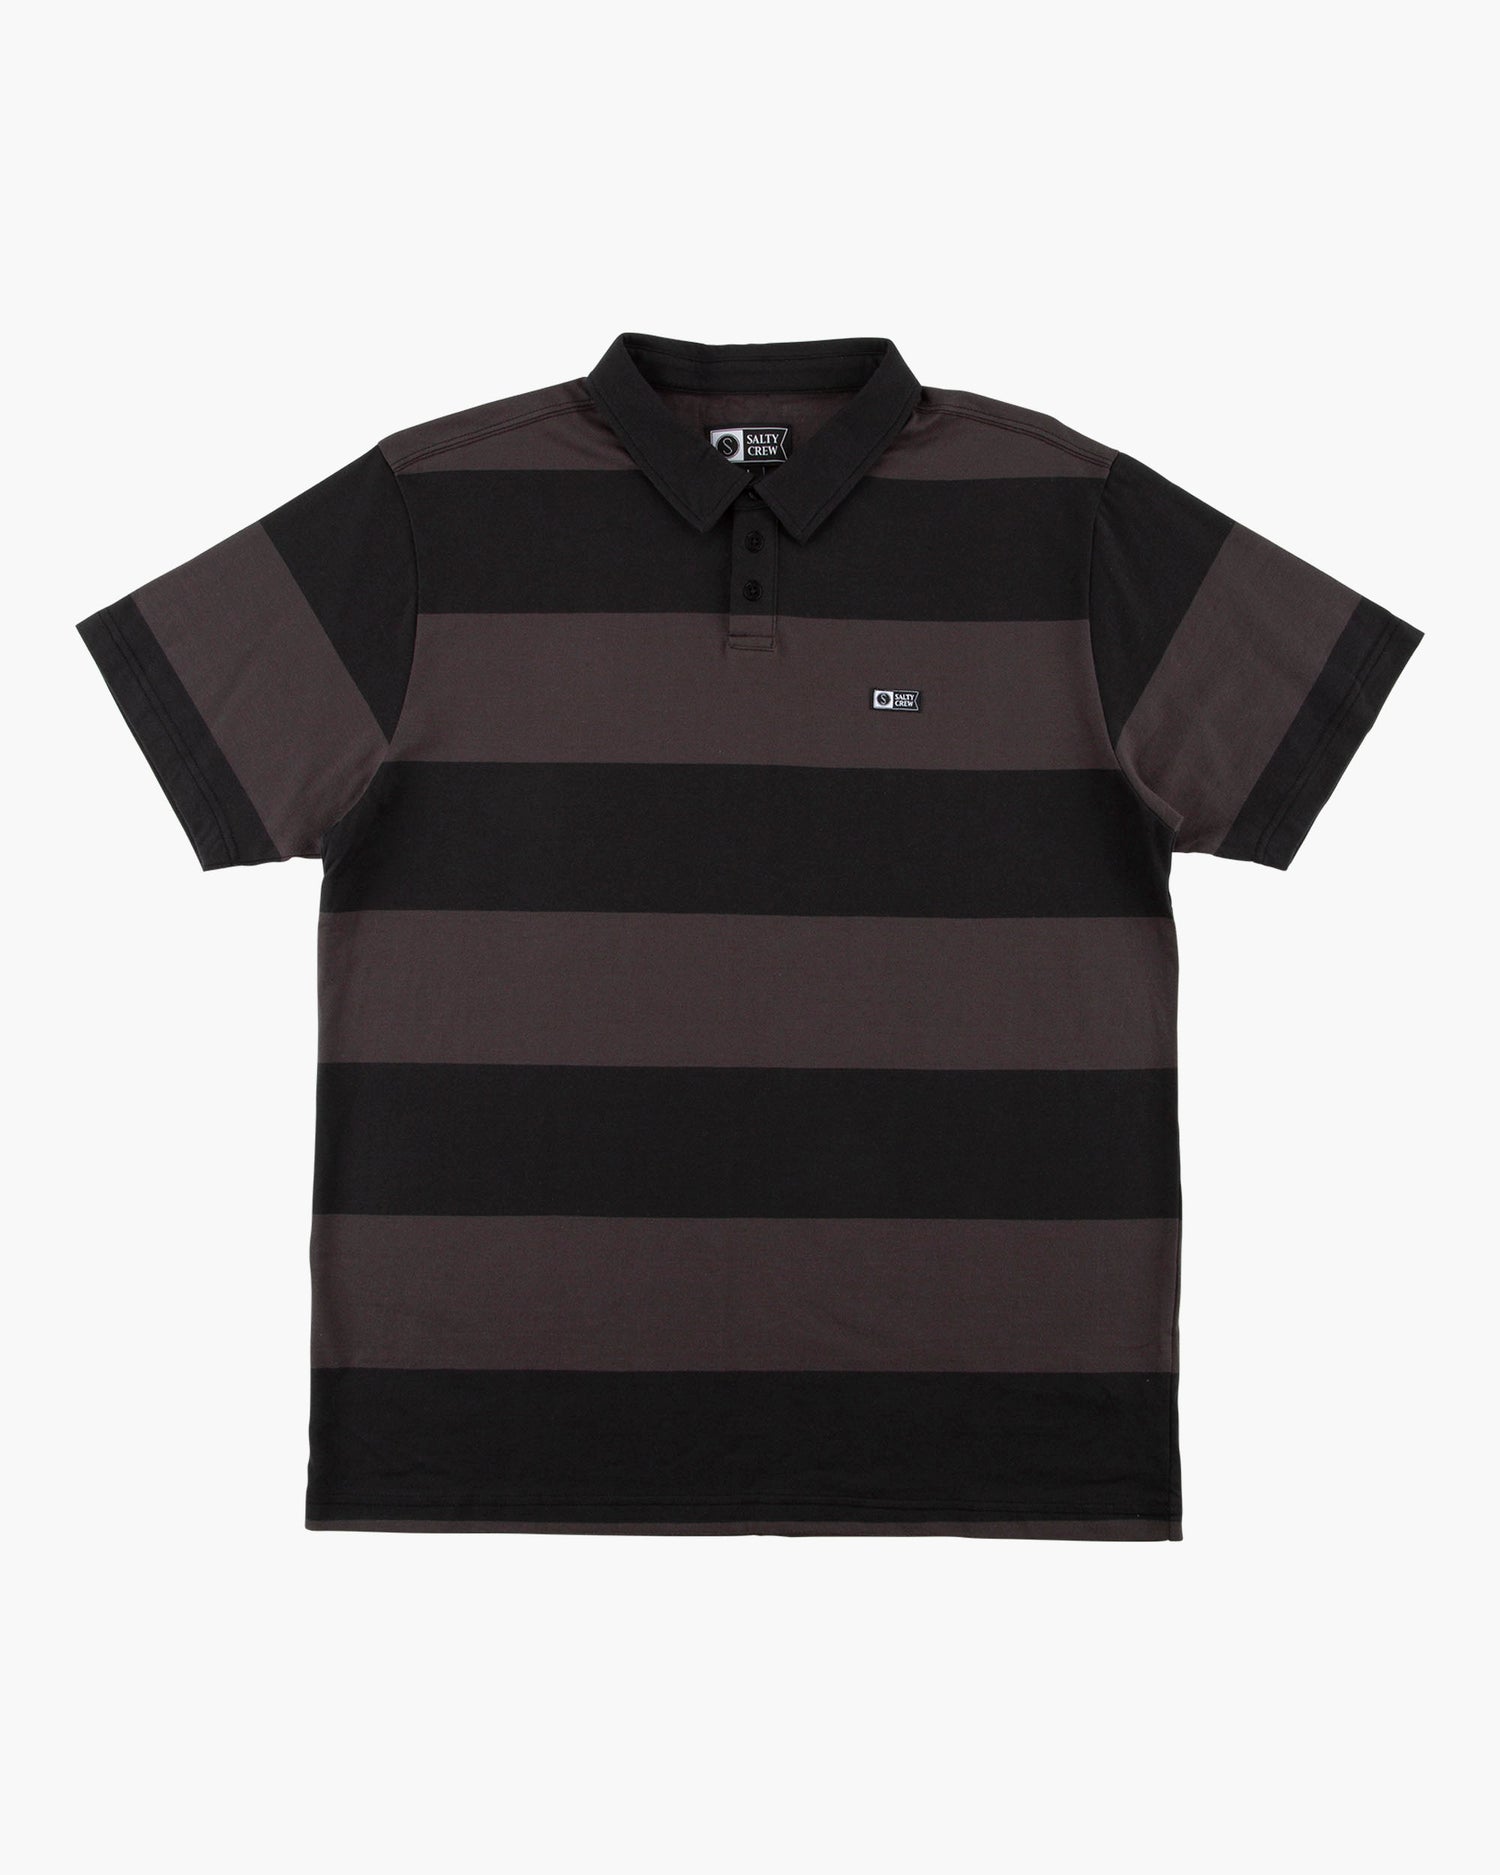 DIVER DOWN S/S POLO - Charcoal